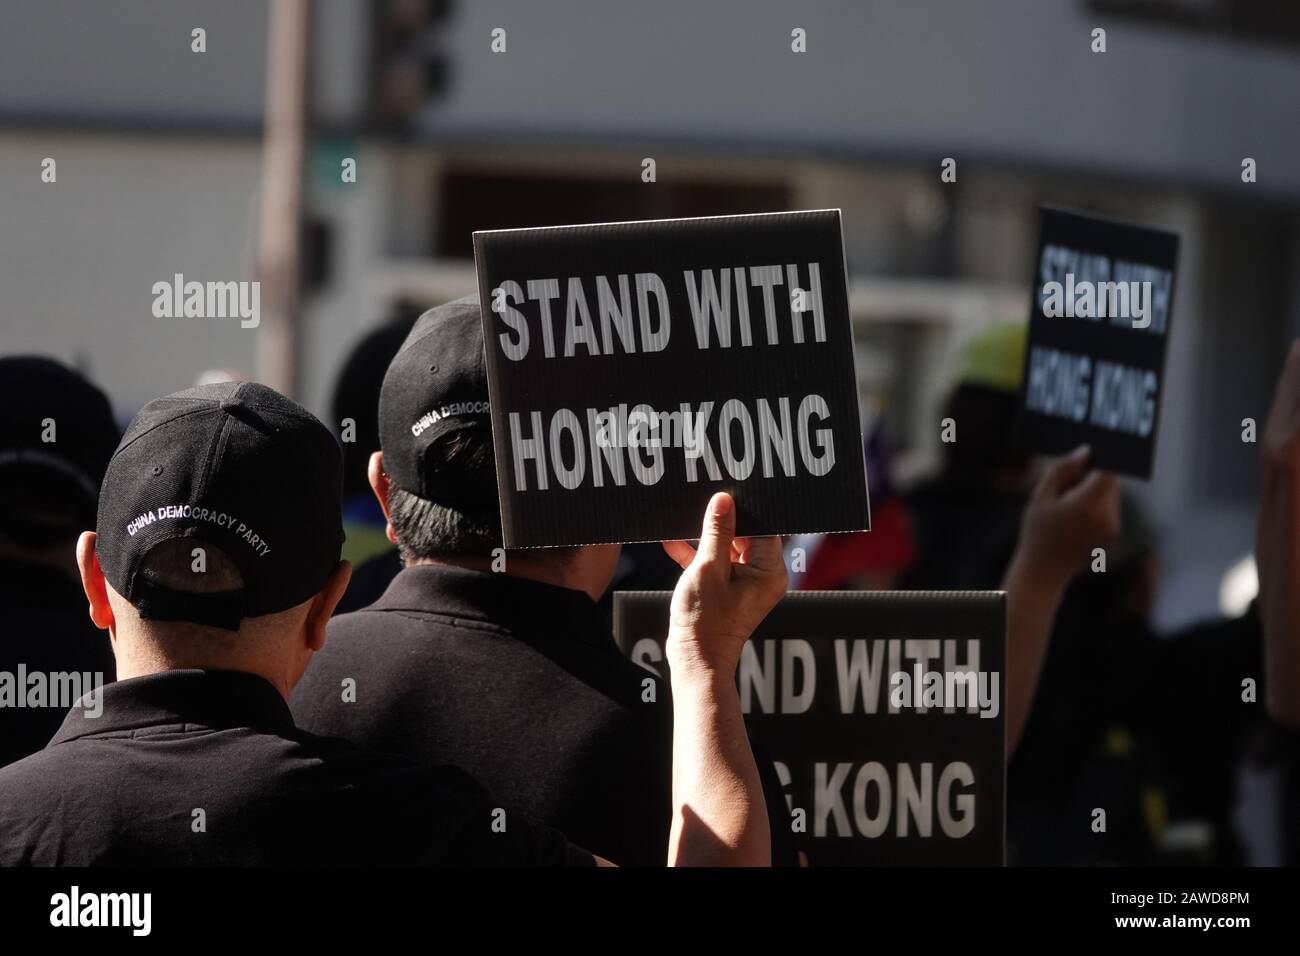 Nov. 24, 2019: Signs reading STAND WITH HONG KONG are shown being held by unidentified men wearing hats embroidered with CHINA DEMOCRACY PARTY. Stock Photo